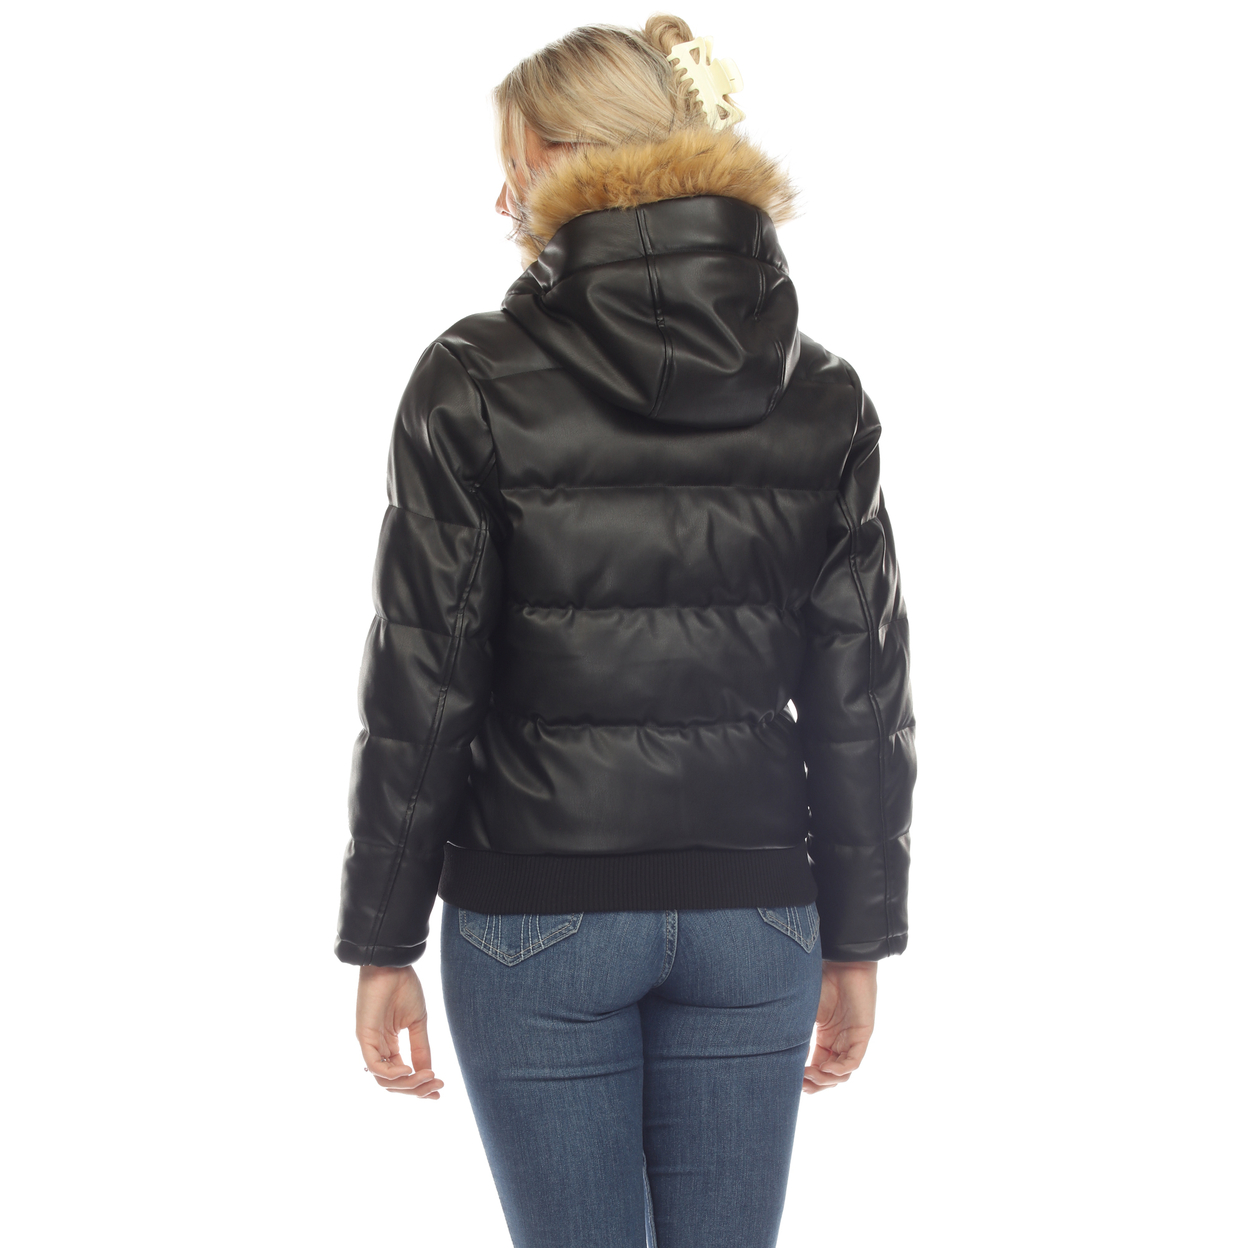 White Mark Women's Removable Fur Hoodie PU Leather Puffer Jacket - Black, Large